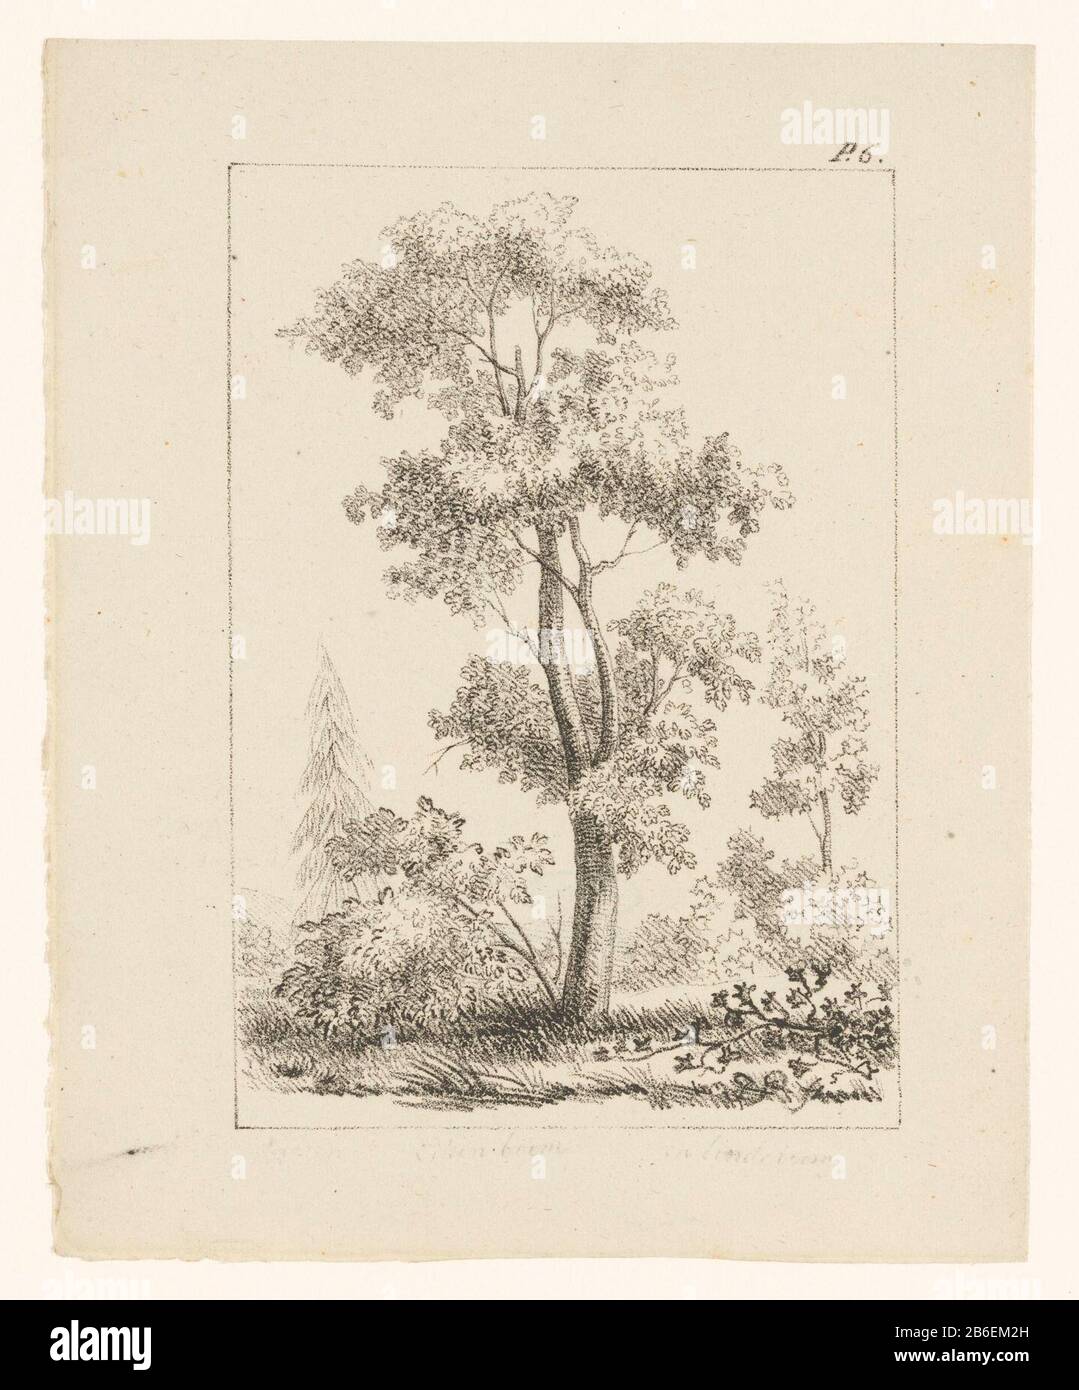 Tree in the forest, the tick art made easy (series title object) The tree is between two other trees and some bushes. Numbered upper right: P. 6. Manufacturer : print maker: anonymous publisher: Brothers of ArumPlaats manufacture: print maker: The Netherlands Publisher: Amsterdam Date: 1819 - 1837 Physical characteristics: lithography material: paper technique: lithography (technique) Dimensions: sheet: h 210 mm × W 165 mm Subject: tree forest, wood procurement and legal Stock Photo